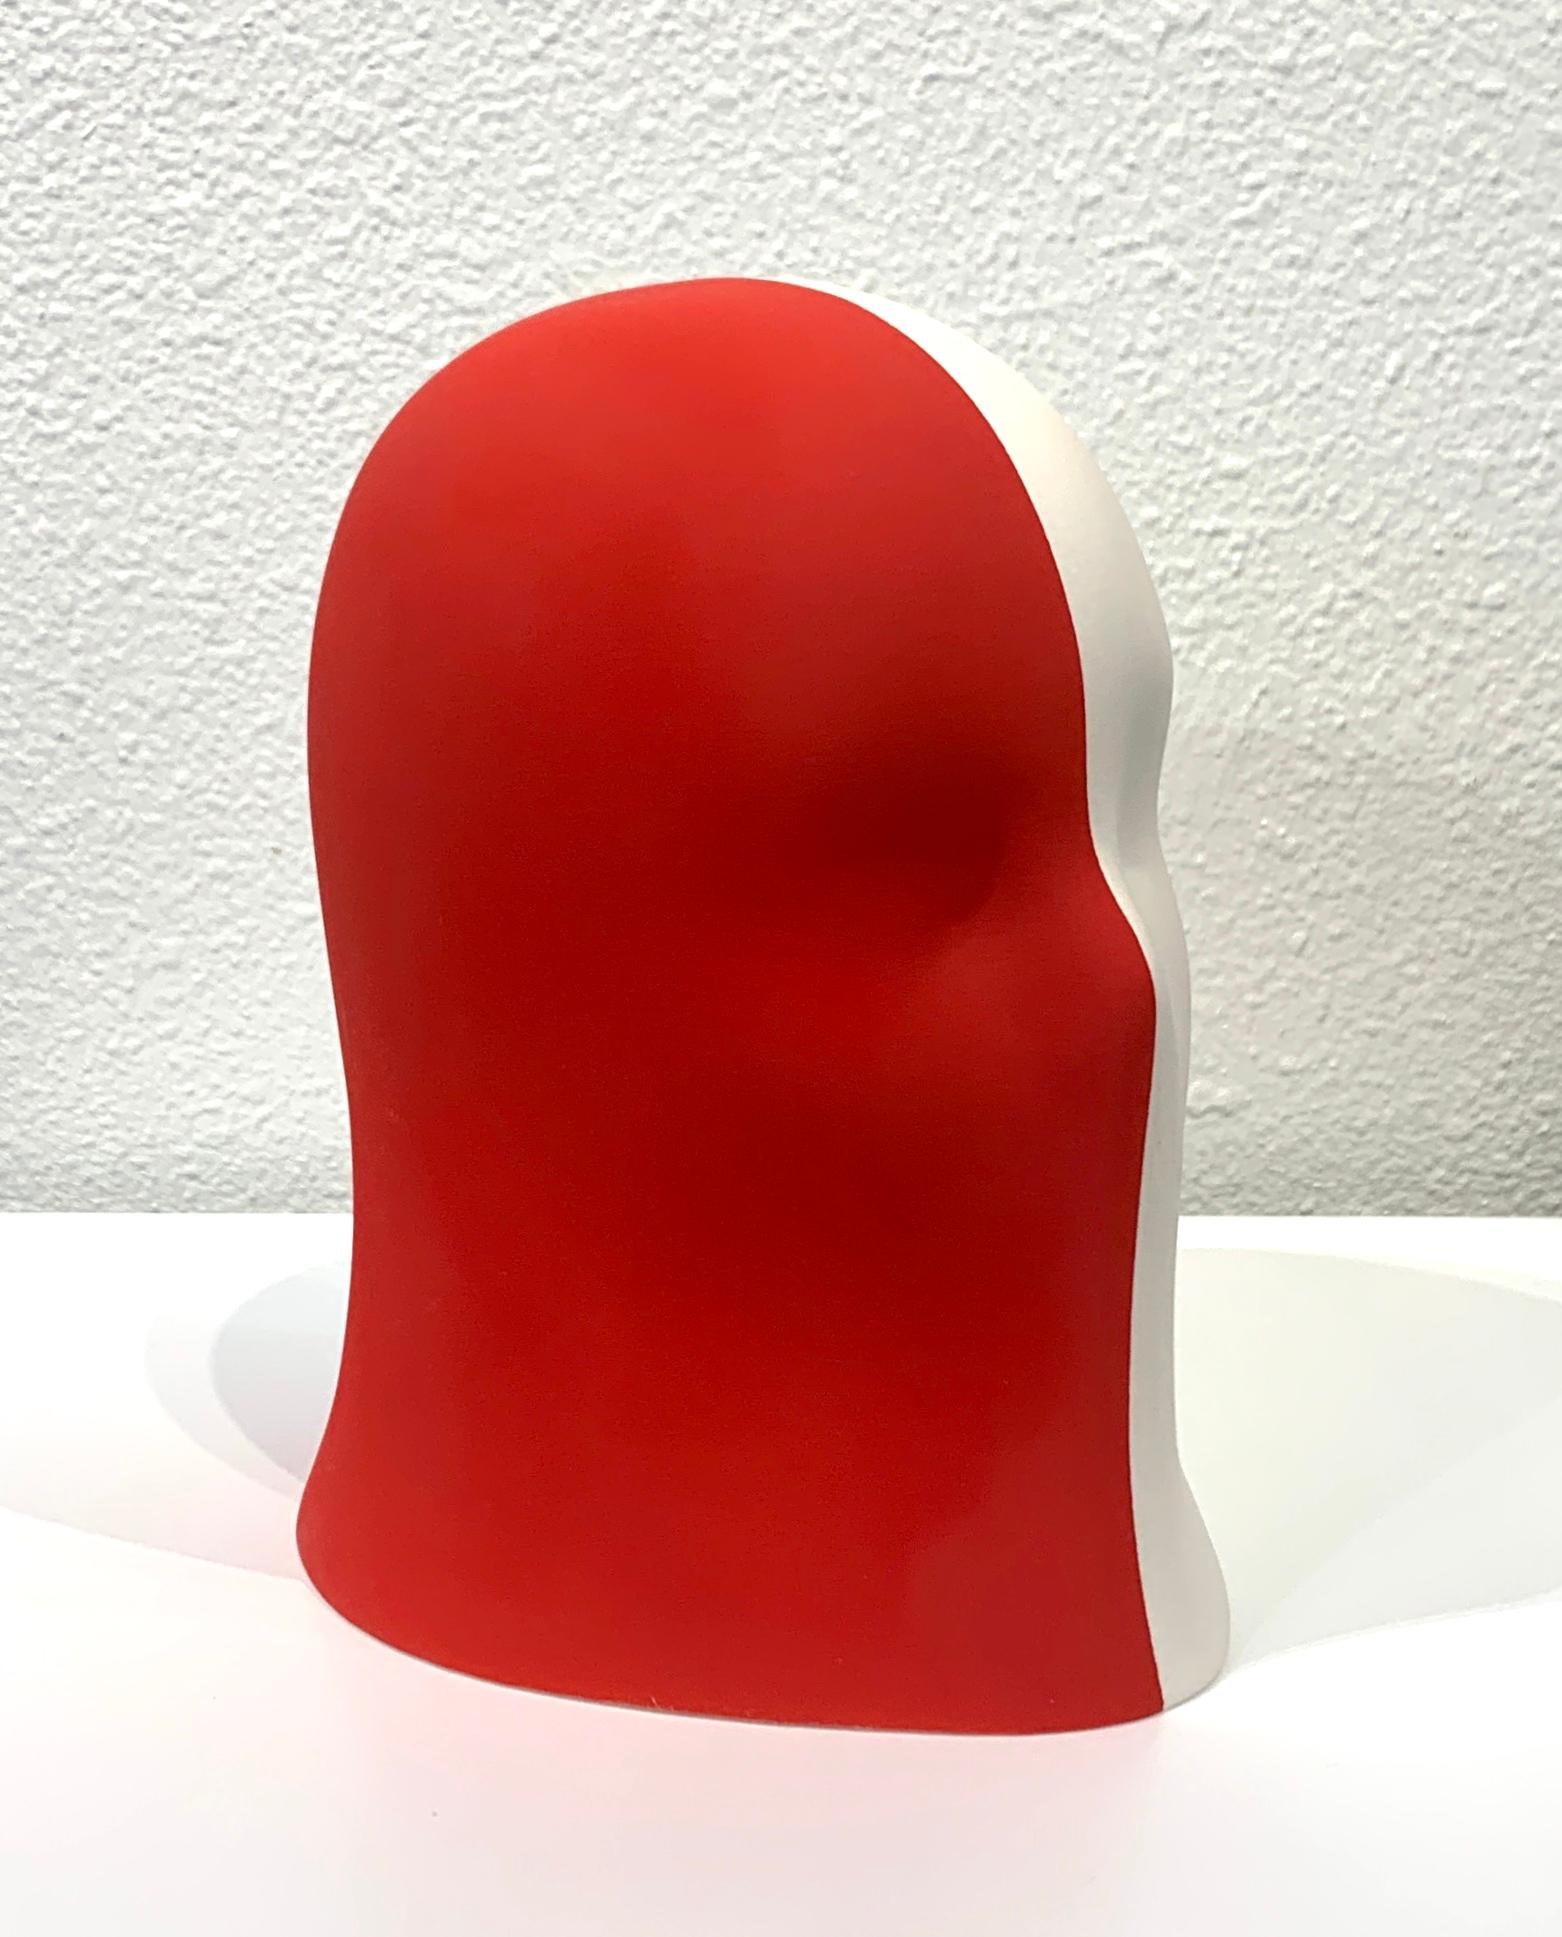 Red/White Veil - Contemporary Sculpture by Chloe Rizzo